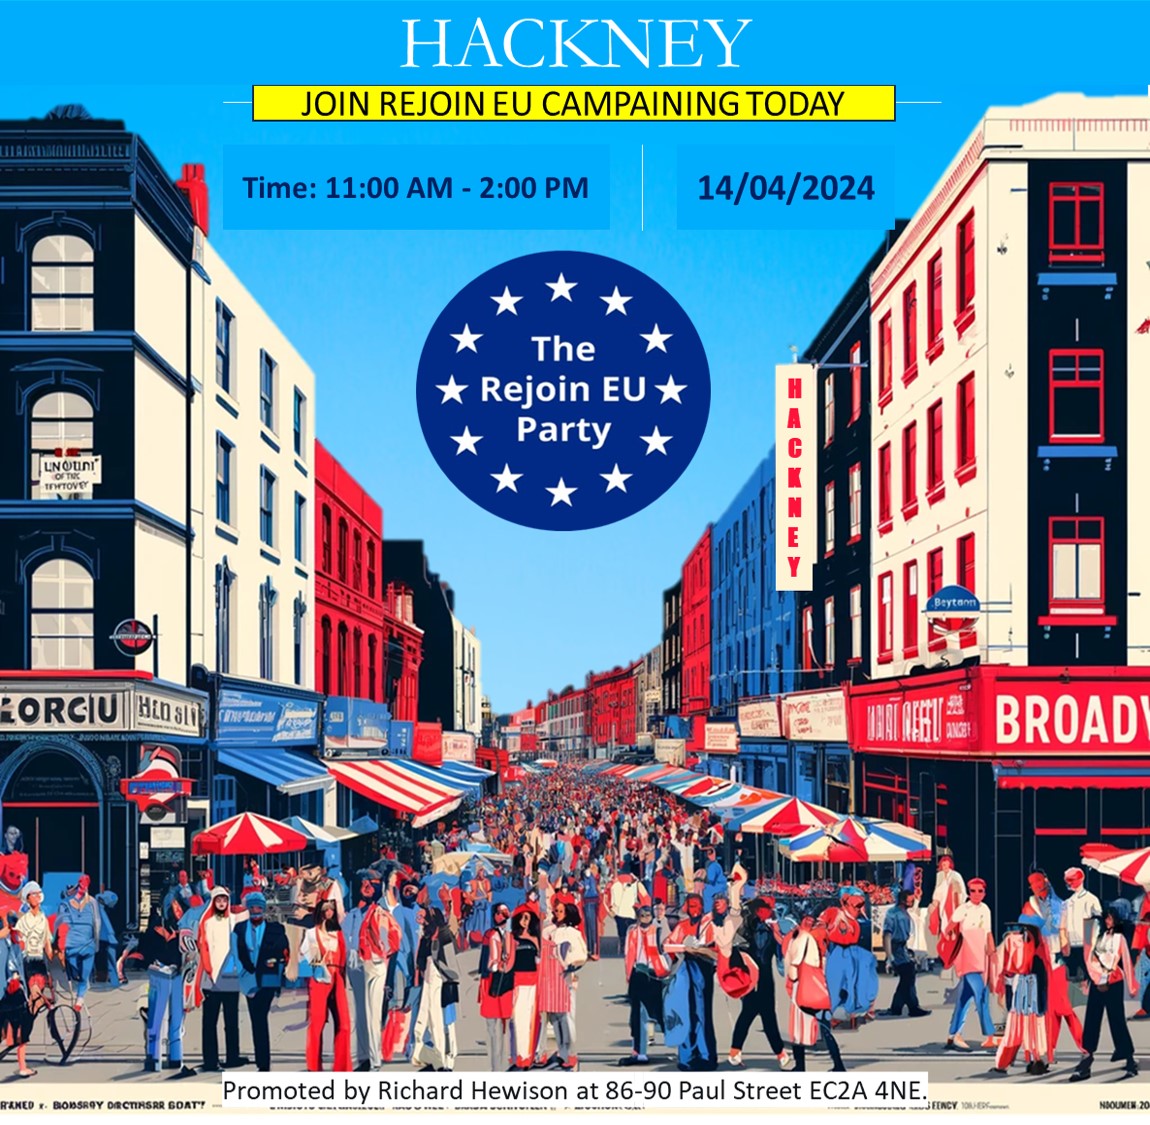 Rejoin Will Be Campaigning in Hackney Today, Sun 14. 11:00 AM - 2:00 PM Location: Hackney Central, Broadway Market